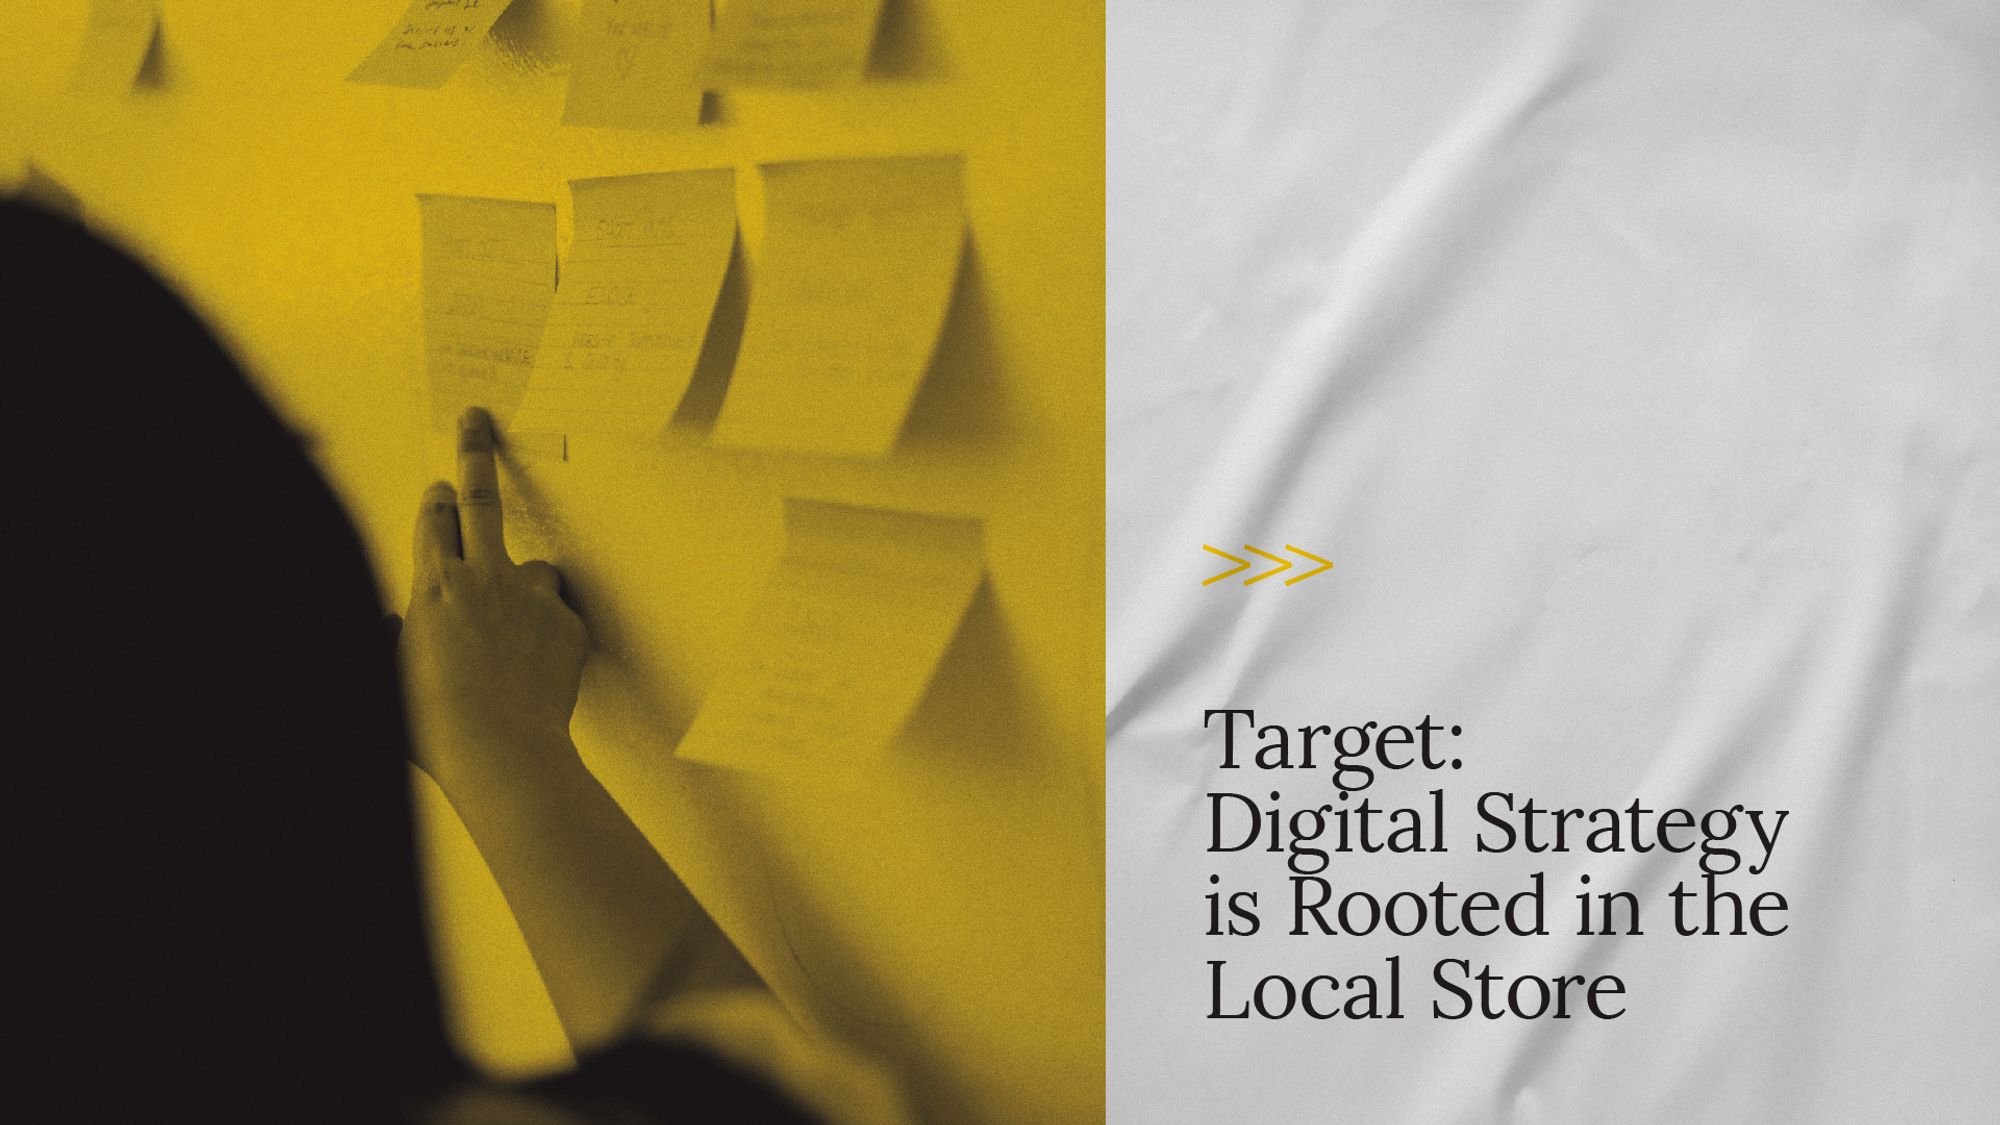 Target: Digital Strategy is Rooted in the Local Store